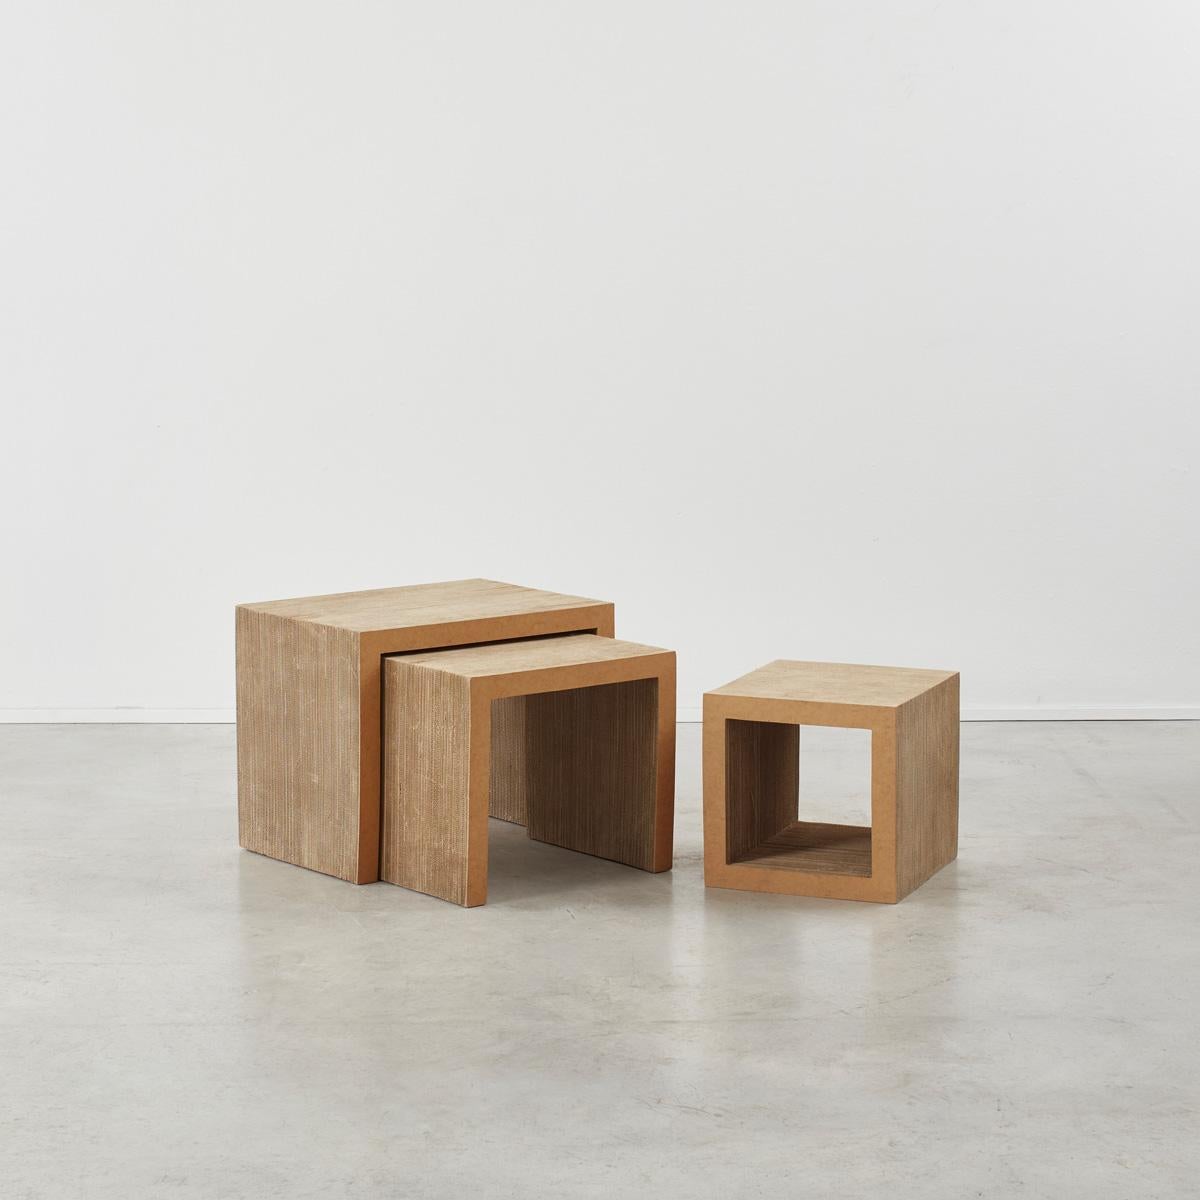 Frank Gehry, the ‘gratuitously eccentric’ architect behind the Guggenheim Bilbao gained attention in the 1970s with his ‘Easy Edges’ furniture series (1969-73). Constructed in corrugated cardboard and fibreboard, the line’s most emblematic designs